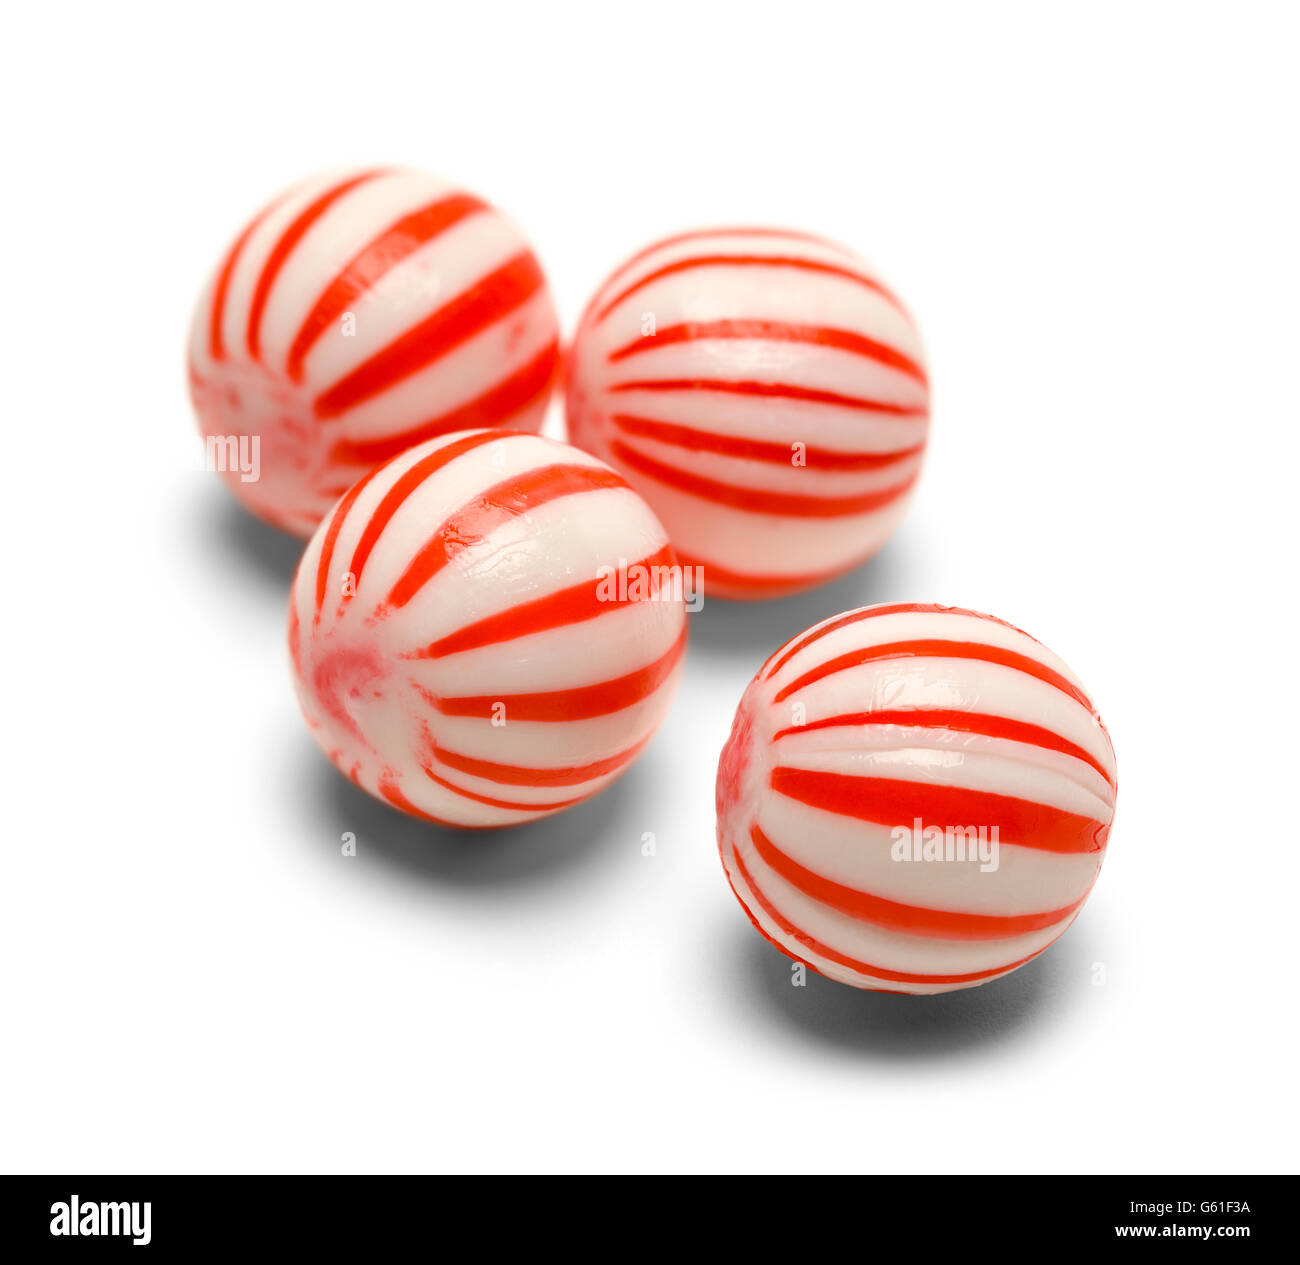 Four Peppermint Balls Isolated on White Background. Stock Photo